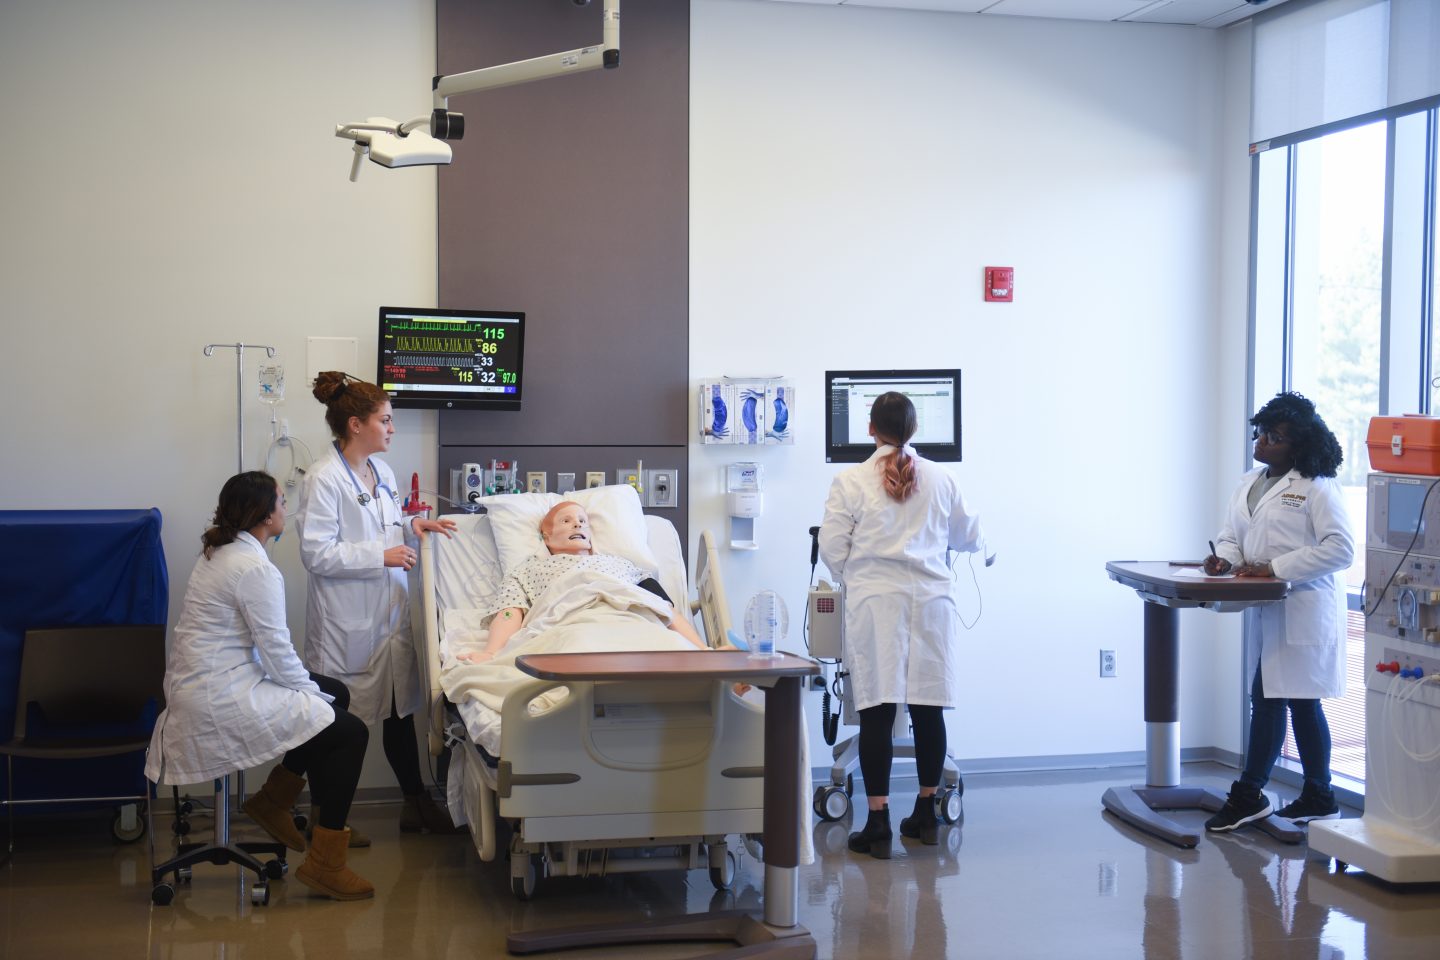 Here, a cohort of students addresses an emergency code situation with a high-fidelity manikin and gains experience in electronic medical record processes. Various manikins, supportive supplies and state-of-the-art equipment enable faculty and students to translate theory into practice.